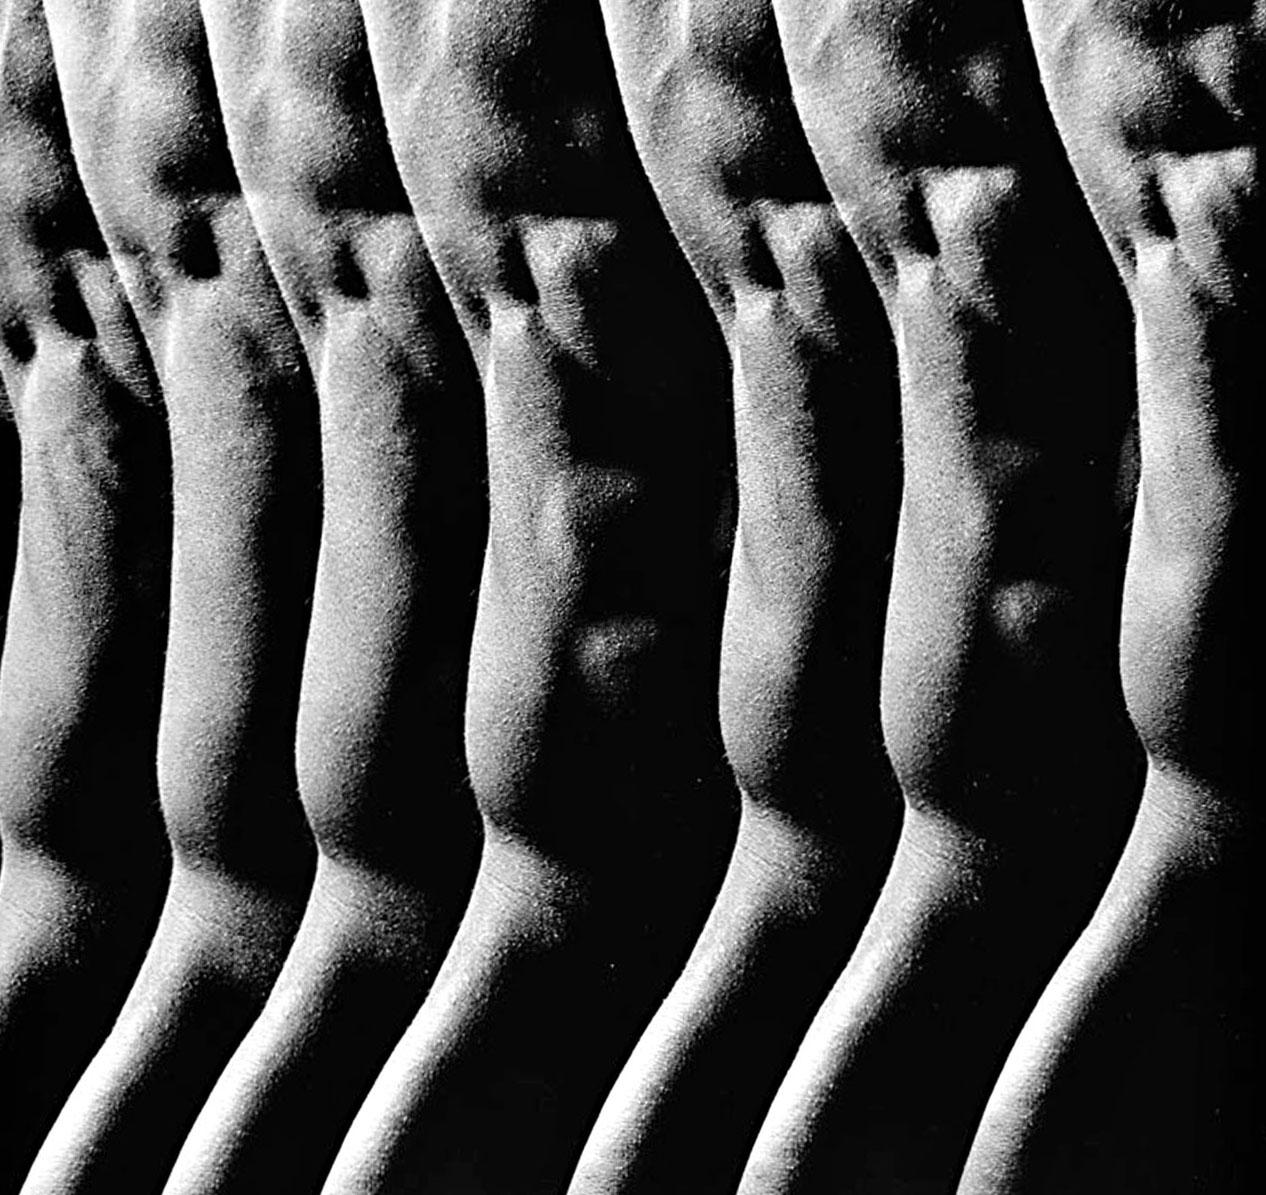 Male Nude from Numbered Nudes Series, multiple exposure signed exhibition print - Photograph by Jack Mitchell